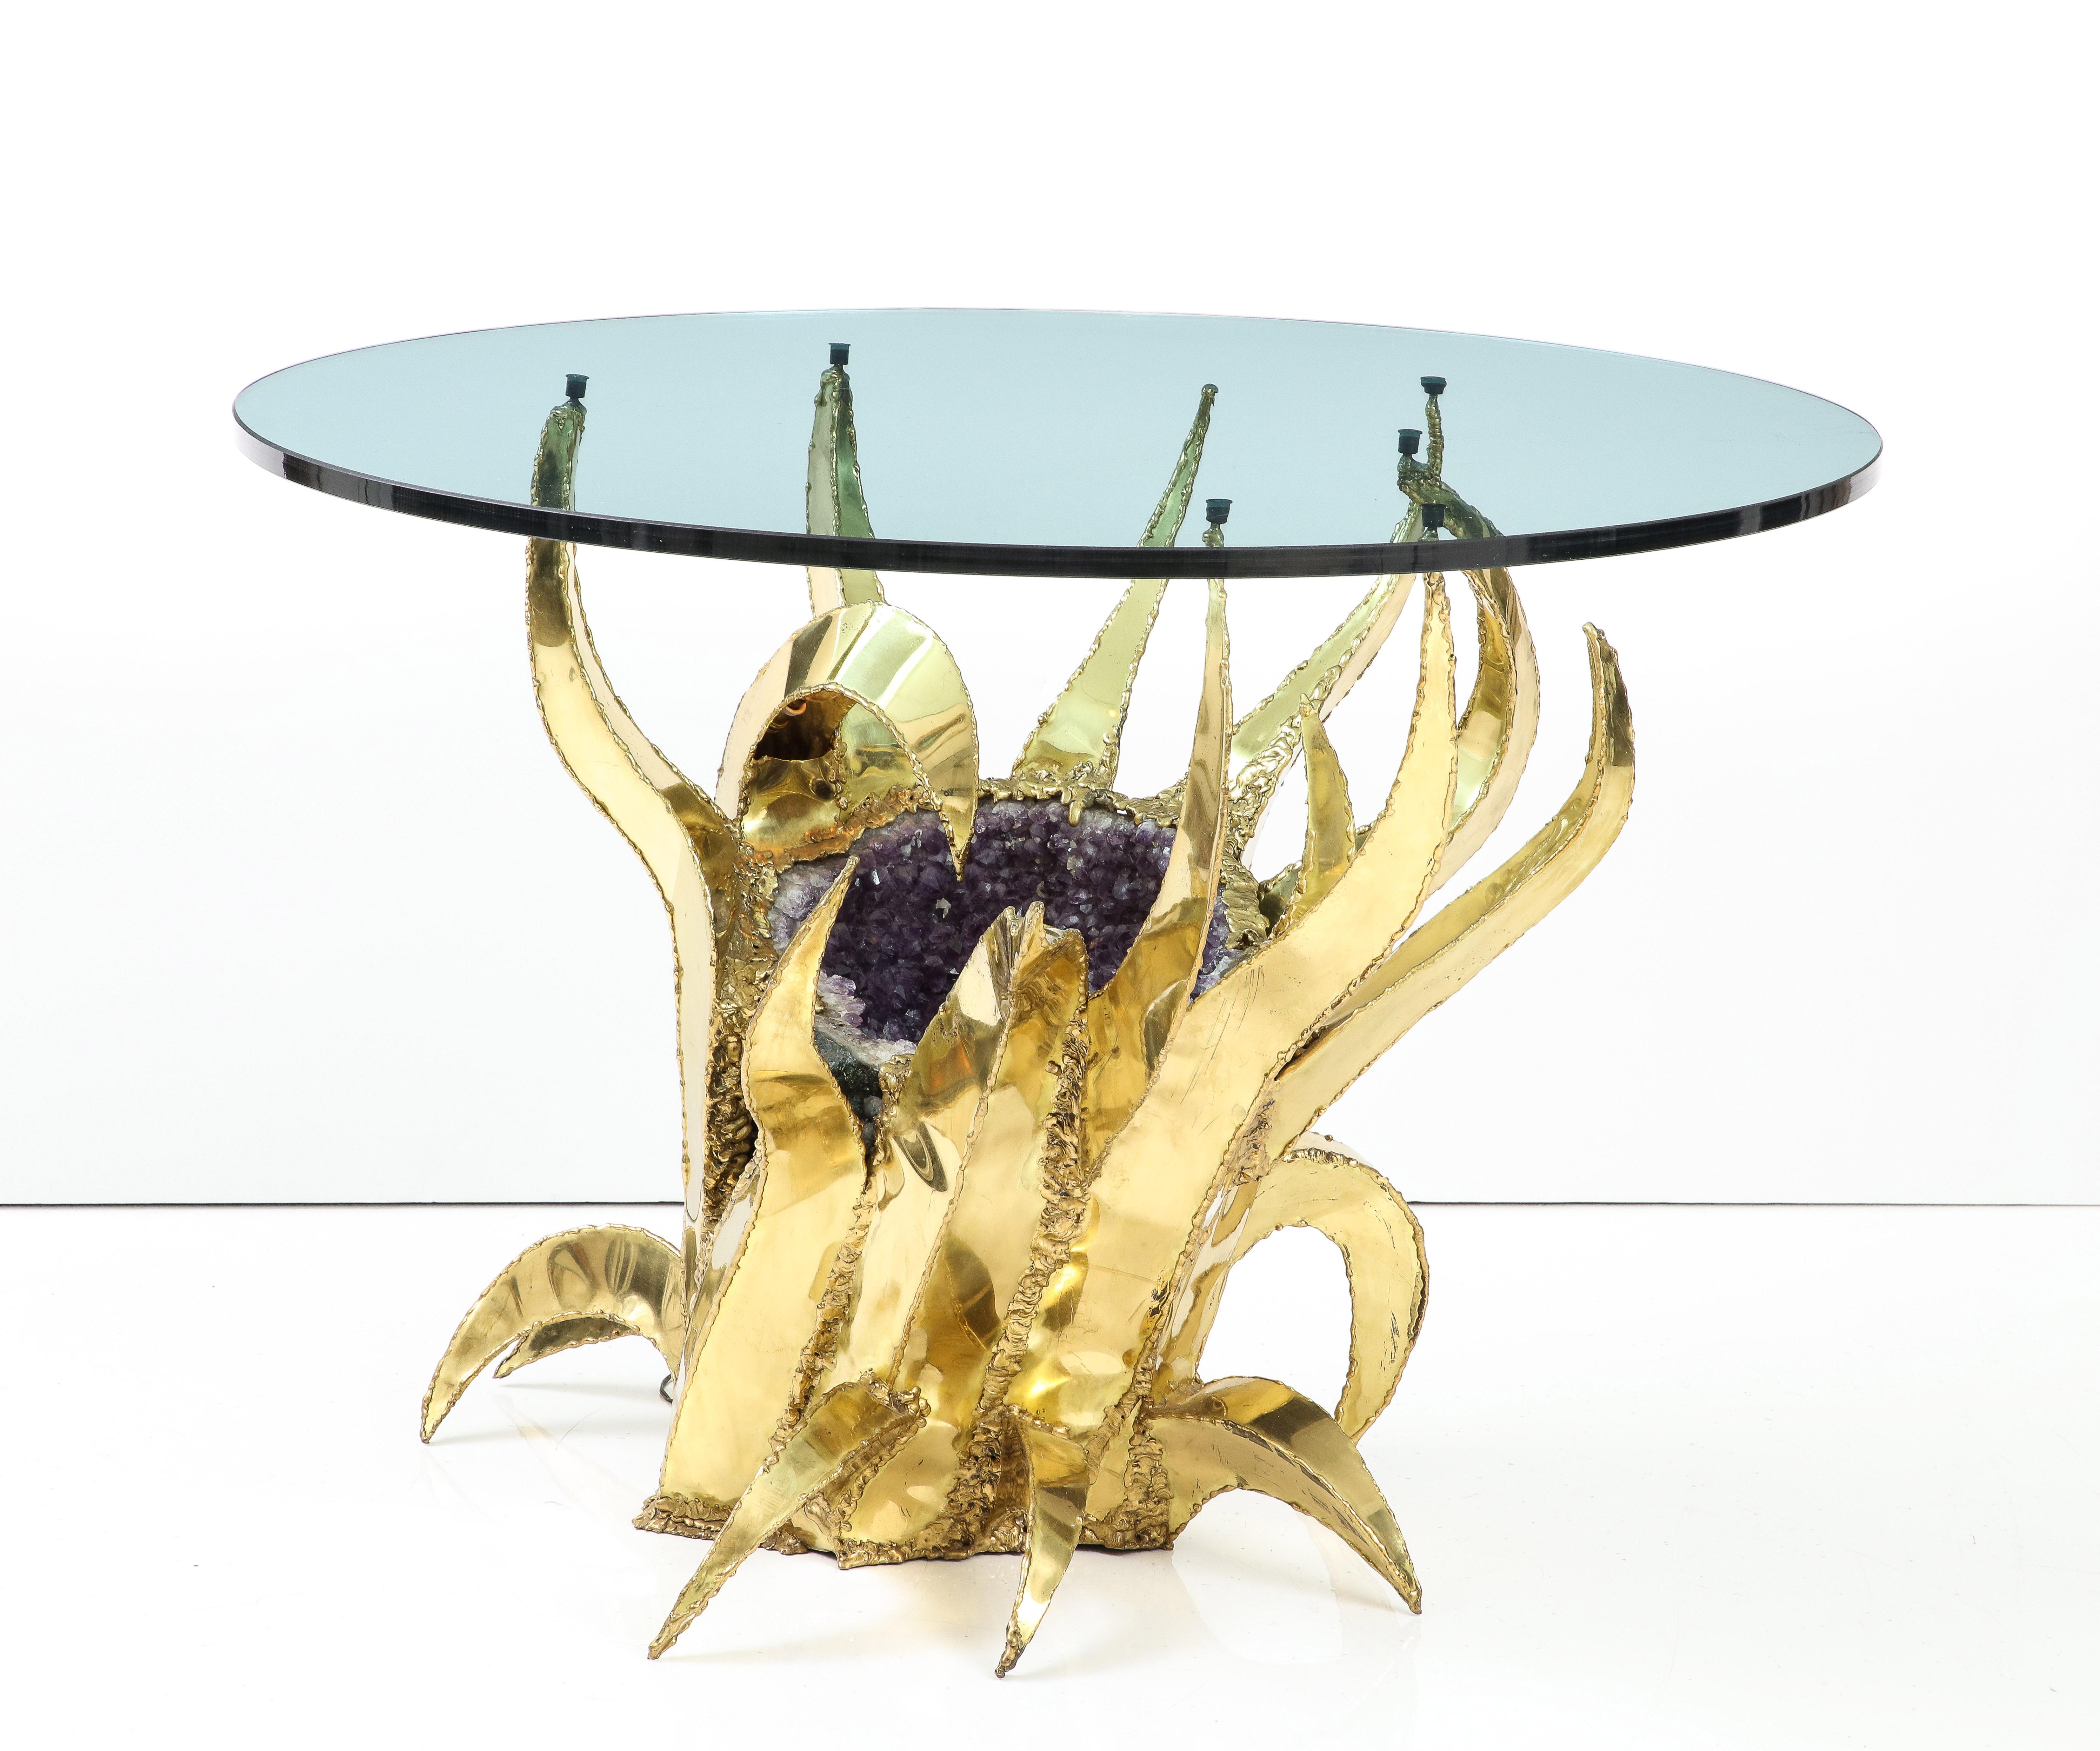 A wonderful sculptural brass 1970s French table with a large amethyst crystal cluster at its center illuminated with an adjoining light socket. Can be used as a center table or a dining surface. Beautiful and unique.